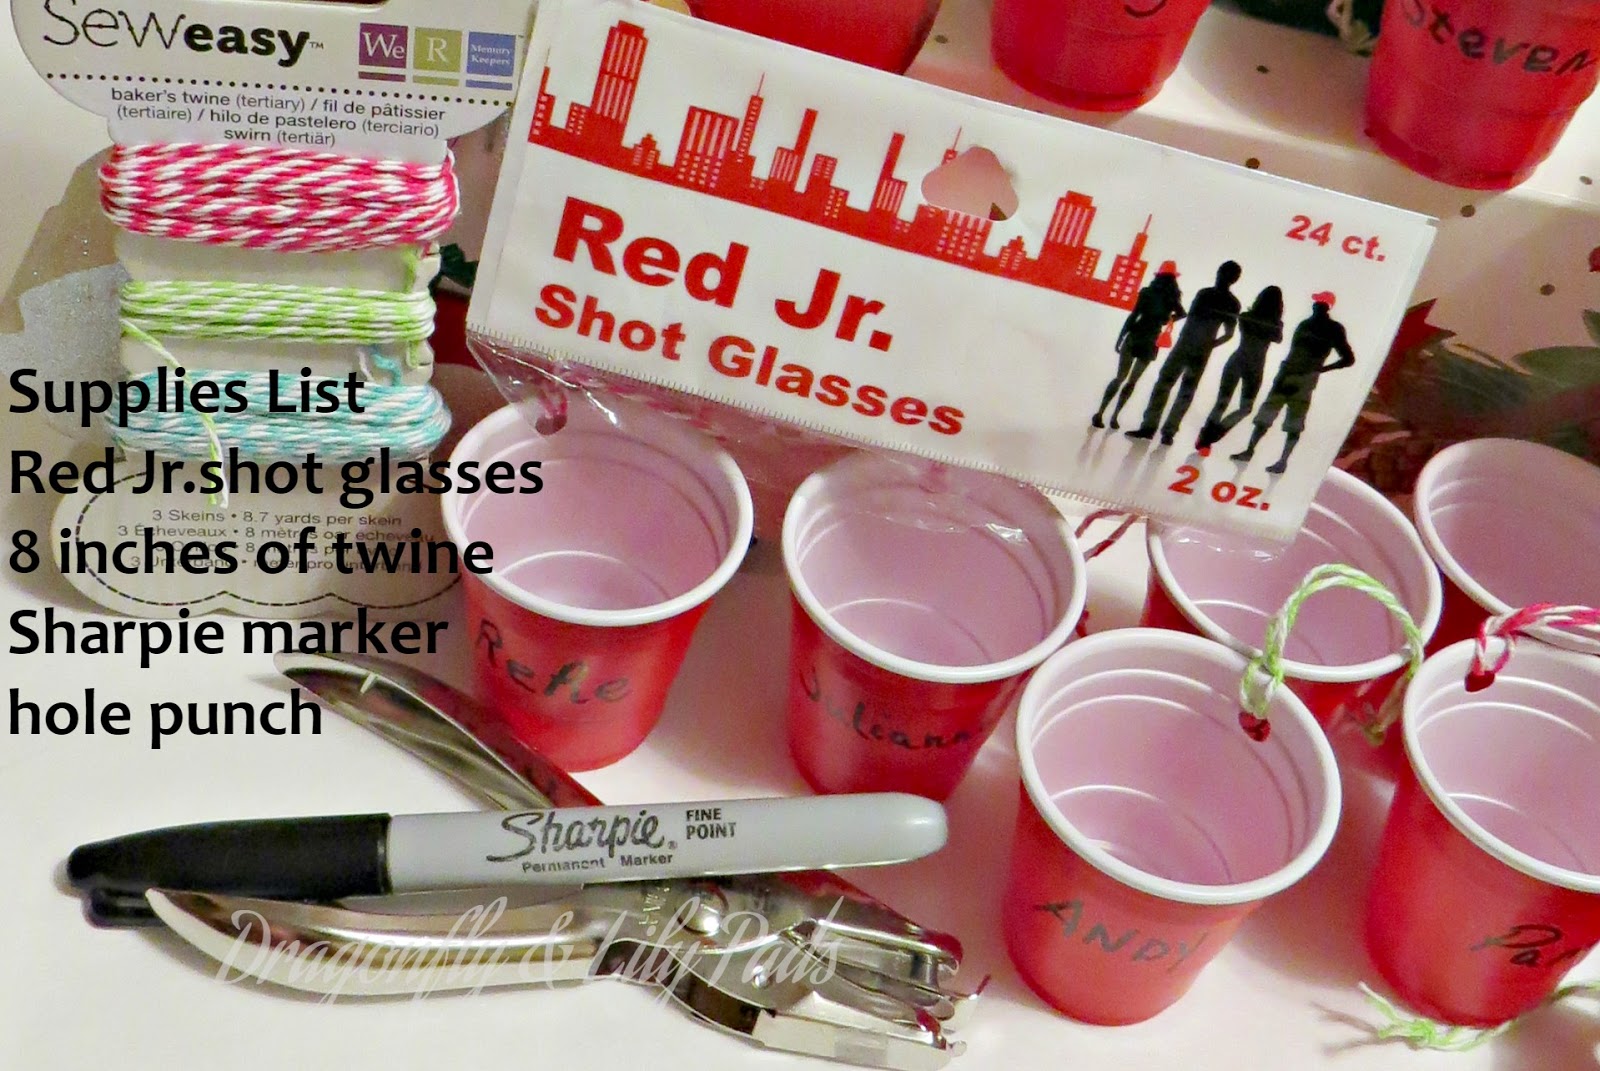 Sharpie Marker, Decroative Twine, Hole Punch, Red Jr. Shopt Glasses, Christmas Ornament Red Solo Cups